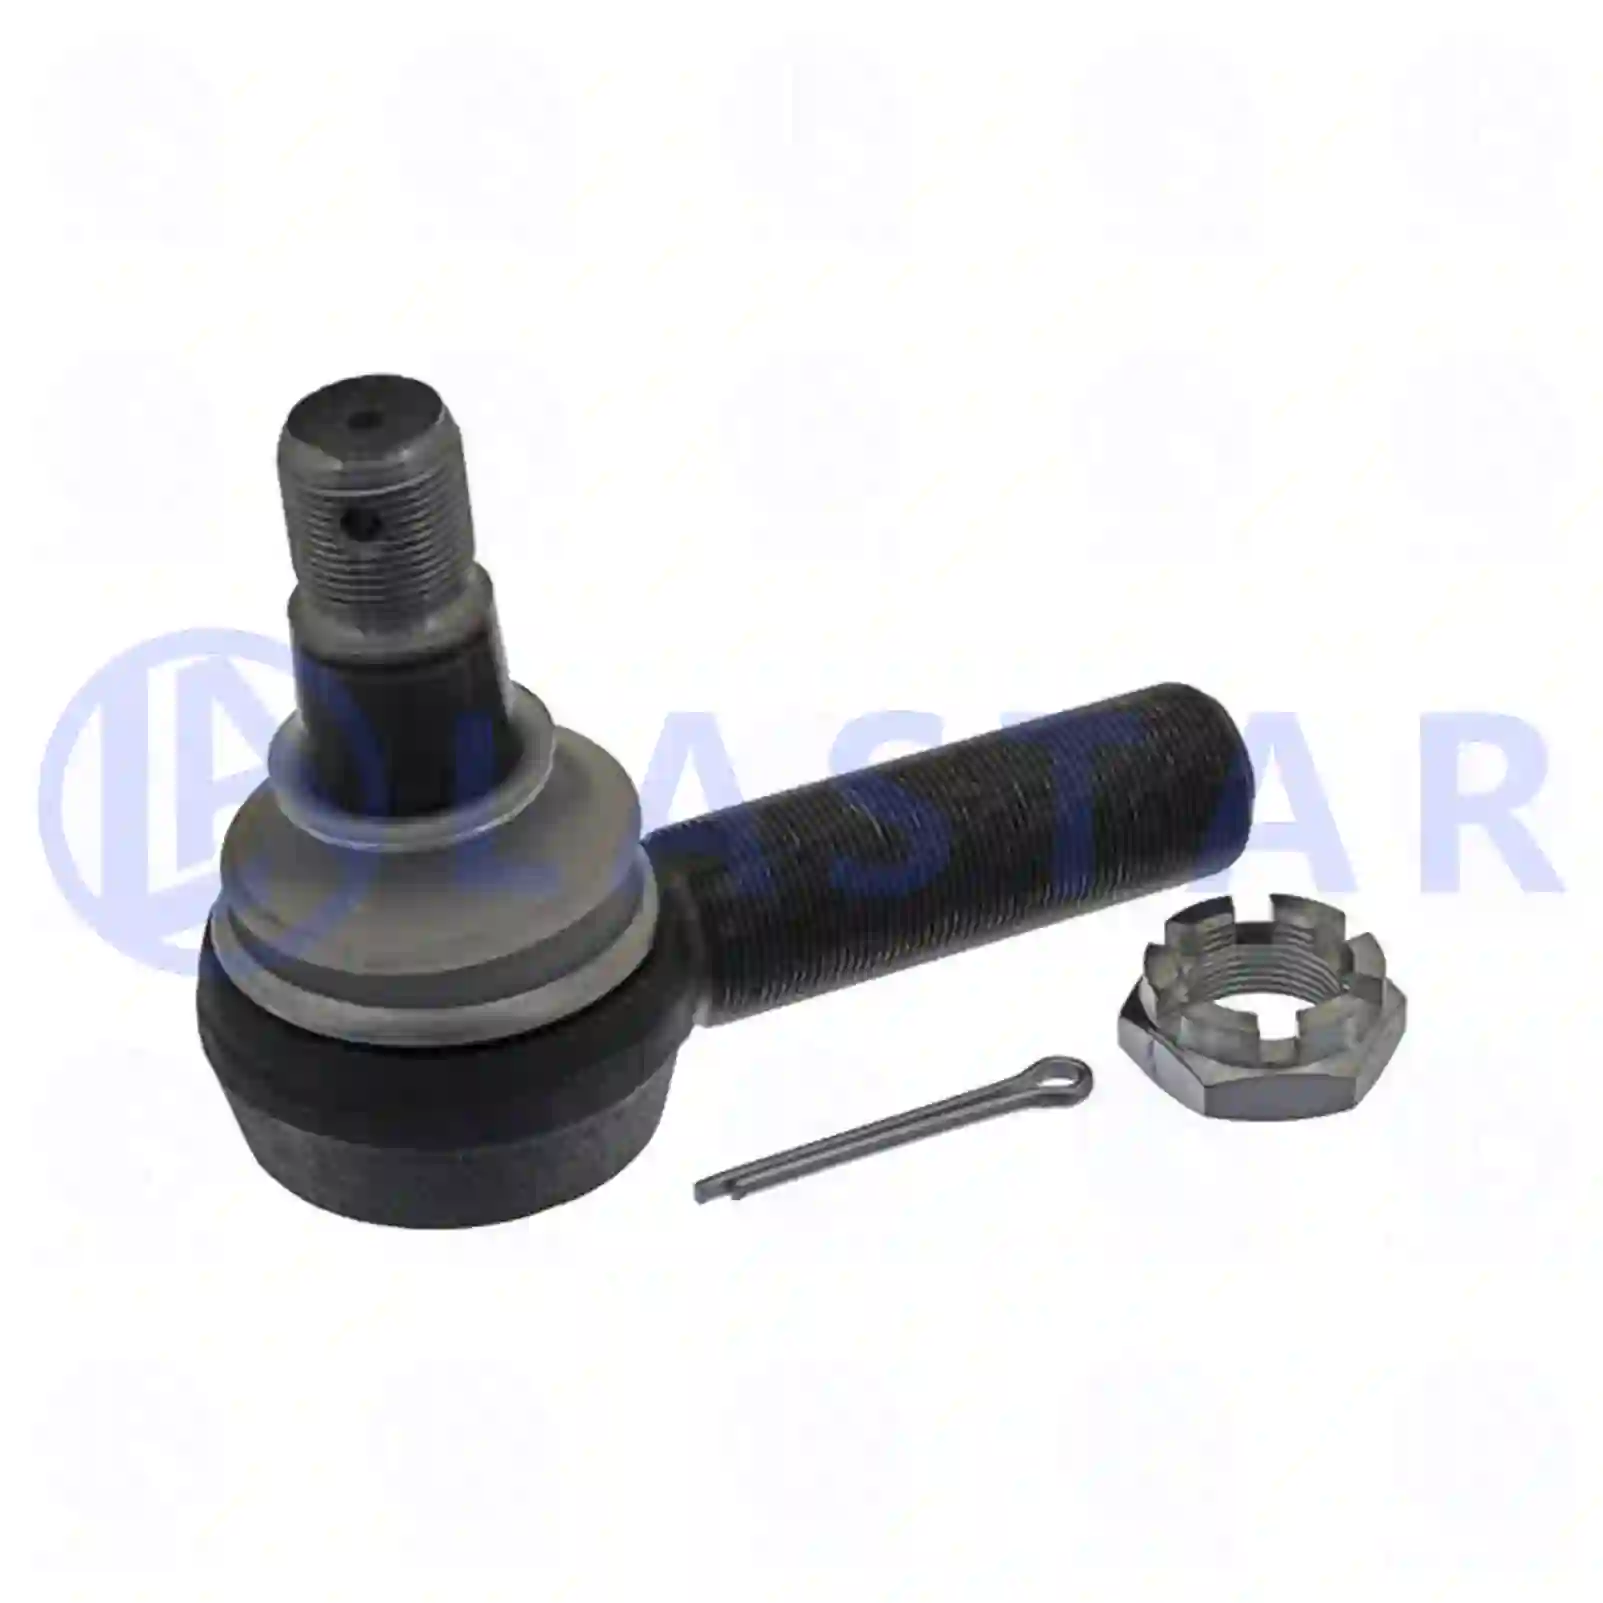 Ball joint, left hand thread, 77705105, 9P914835, 264072, 510052, 3141529R3, 0607053, 0690225, 0696225, 1142021, 1228115, 1329134, 1611088, 607053, 690225, 696205, 696225, 655551, 02966688, 02980323, 02984061, 03096213, 04802444, 04833820, 04833827, 04833830, 07138966, 08122754, 08190225, 42483520, 42485718, 42489395, 42491957, 42493781, 997084080374, 02984061, 04802444, 04833829, 04833830, 42489395, 42489574, 42491957, Y04505101, 56812-7M100, 02984061, 04802444, 04833823, 04833830, 07138966, 08190225, 2984061, 42489395, 42489574, 42491957, 4802444, 4833830, 5001836297, 801211834, 8190225, 571866508, 725009908, 81953010015, 81953010083, 81953010087, 81953010095, 81953010102, 81953016029, 81953016044, 81953016050, 81953016054, 81953016087, 81953016091, 81953016099, 81953016107, 81953016120, 81953016125, 81953016152, 81953016155, 81953016157, 81953016167, 81953016177, 81953016179, 81953016181, 81953016223, 81953016237, 81953016253, 81953016254, 81953016275, 81953016279, 81953016285, 81953016309, 81953016311, 81953016348, 81953016351, 81953016378, 84953016004, 90804102273, 90804102730, N1011020299, 0003300135, 0004600648, 0004601248, 0004603448, 0004603548, 0014600348, 0014601448, 0014602348, 0014603648, 0014603748, 0014607848, 0014608748, 0016077848, 0024600348, 3503307335, 3503307535, 6851476000, 6984603748, 8226236058, 011015685, 011019661, 120325101, 120325200, 122353201, 579343, 0003401170, 5000242478, 5000242486, 5000288361, 5000288378, 5000587534, 5000823265, 5000858774, 5001832581, 5001836297, 5001858759, 5001858774, 5010832583, 5430027884, 7420894053, 8001858759, 1358792, 1420821, 1738380, 1914426, 2021425, 2051165, 283783, 395009, 6851481000, 6851485000, 8226236058, 0801211834, 218633100115, 634301300, 20264072, 15176472, 1696057, 1697297, 20742129, 20745042, 20821150, 20894053, ZG40346-0008 ||  77705105 Lastar Spare Part | Truck Spare Parts, Auotomotive Spare Parts Ball joint, left hand thread, 77705105, 9P914835, 264072, 510052, 3141529R3, 0607053, 0690225, 0696225, 1142021, 1228115, 1329134, 1611088, 607053, 690225, 696205, 696225, 655551, 02966688, 02980323, 02984061, 03096213, 04802444, 04833820, 04833827, 04833830, 07138966, 08122754, 08190225, 42483520, 42485718, 42489395, 42491957, 42493781, 997084080374, 02984061, 04802444, 04833829, 04833830, 42489395, 42489574, 42491957, Y04505101, 56812-7M100, 02984061, 04802444, 04833823, 04833830, 07138966, 08190225, 2984061, 42489395, 42489574, 42491957, 4802444, 4833830, 5001836297, 801211834, 8190225, 571866508, 725009908, 81953010015, 81953010083, 81953010087, 81953010095, 81953010102, 81953016029, 81953016044, 81953016050, 81953016054, 81953016087, 81953016091, 81953016099, 81953016107, 81953016120, 81953016125, 81953016152, 81953016155, 81953016157, 81953016167, 81953016177, 81953016179, 81953016181, 81953016223, 81953016237, 81953016253, 81953016254, 81953016275, 81953016279, 81953016285, 81953016309, 81953016311, 81953016348, 81953016351, 81953016378, 84953016004, 90804102273, 90804102730, N1011020299, 0003300135, 0004600648, 0004601248, 0004603448, 0004603548, 0014600348, 0014601448, 0014602348, 0014603648, 0014603748, 0014607848, 0014608748, 0016077848, 0024600348, 3503307335, 3503307535, 6851476000, 6984603748, 8226236058, 011015685, 011019661, 120325101, 120325200, 122353201, 579343, 0003401170, 5000242478, 5000242486, 5000288361, 5000288378, 5000587534, 5000823265, 5000858774, 5001832581, 5001836297, 5001858759, 5001858774, 5010832583, 5430027884, 7420894053, 8001858759, 1358792, 1420821, 1738380, 1914426, 2021425, 2051165, 283783, 395009, 6851481000, 6851485000, 8226236058, 0801211834, 218633100115, 634301300, 20264072, 15176472, 1696057, 1697297, 20742129, 20745042, 20821150, 20894053, ZG40346-0008 ||  77705105 Lastar Spare Part | Truck Spare Parts, Auotomotive Spare Parts